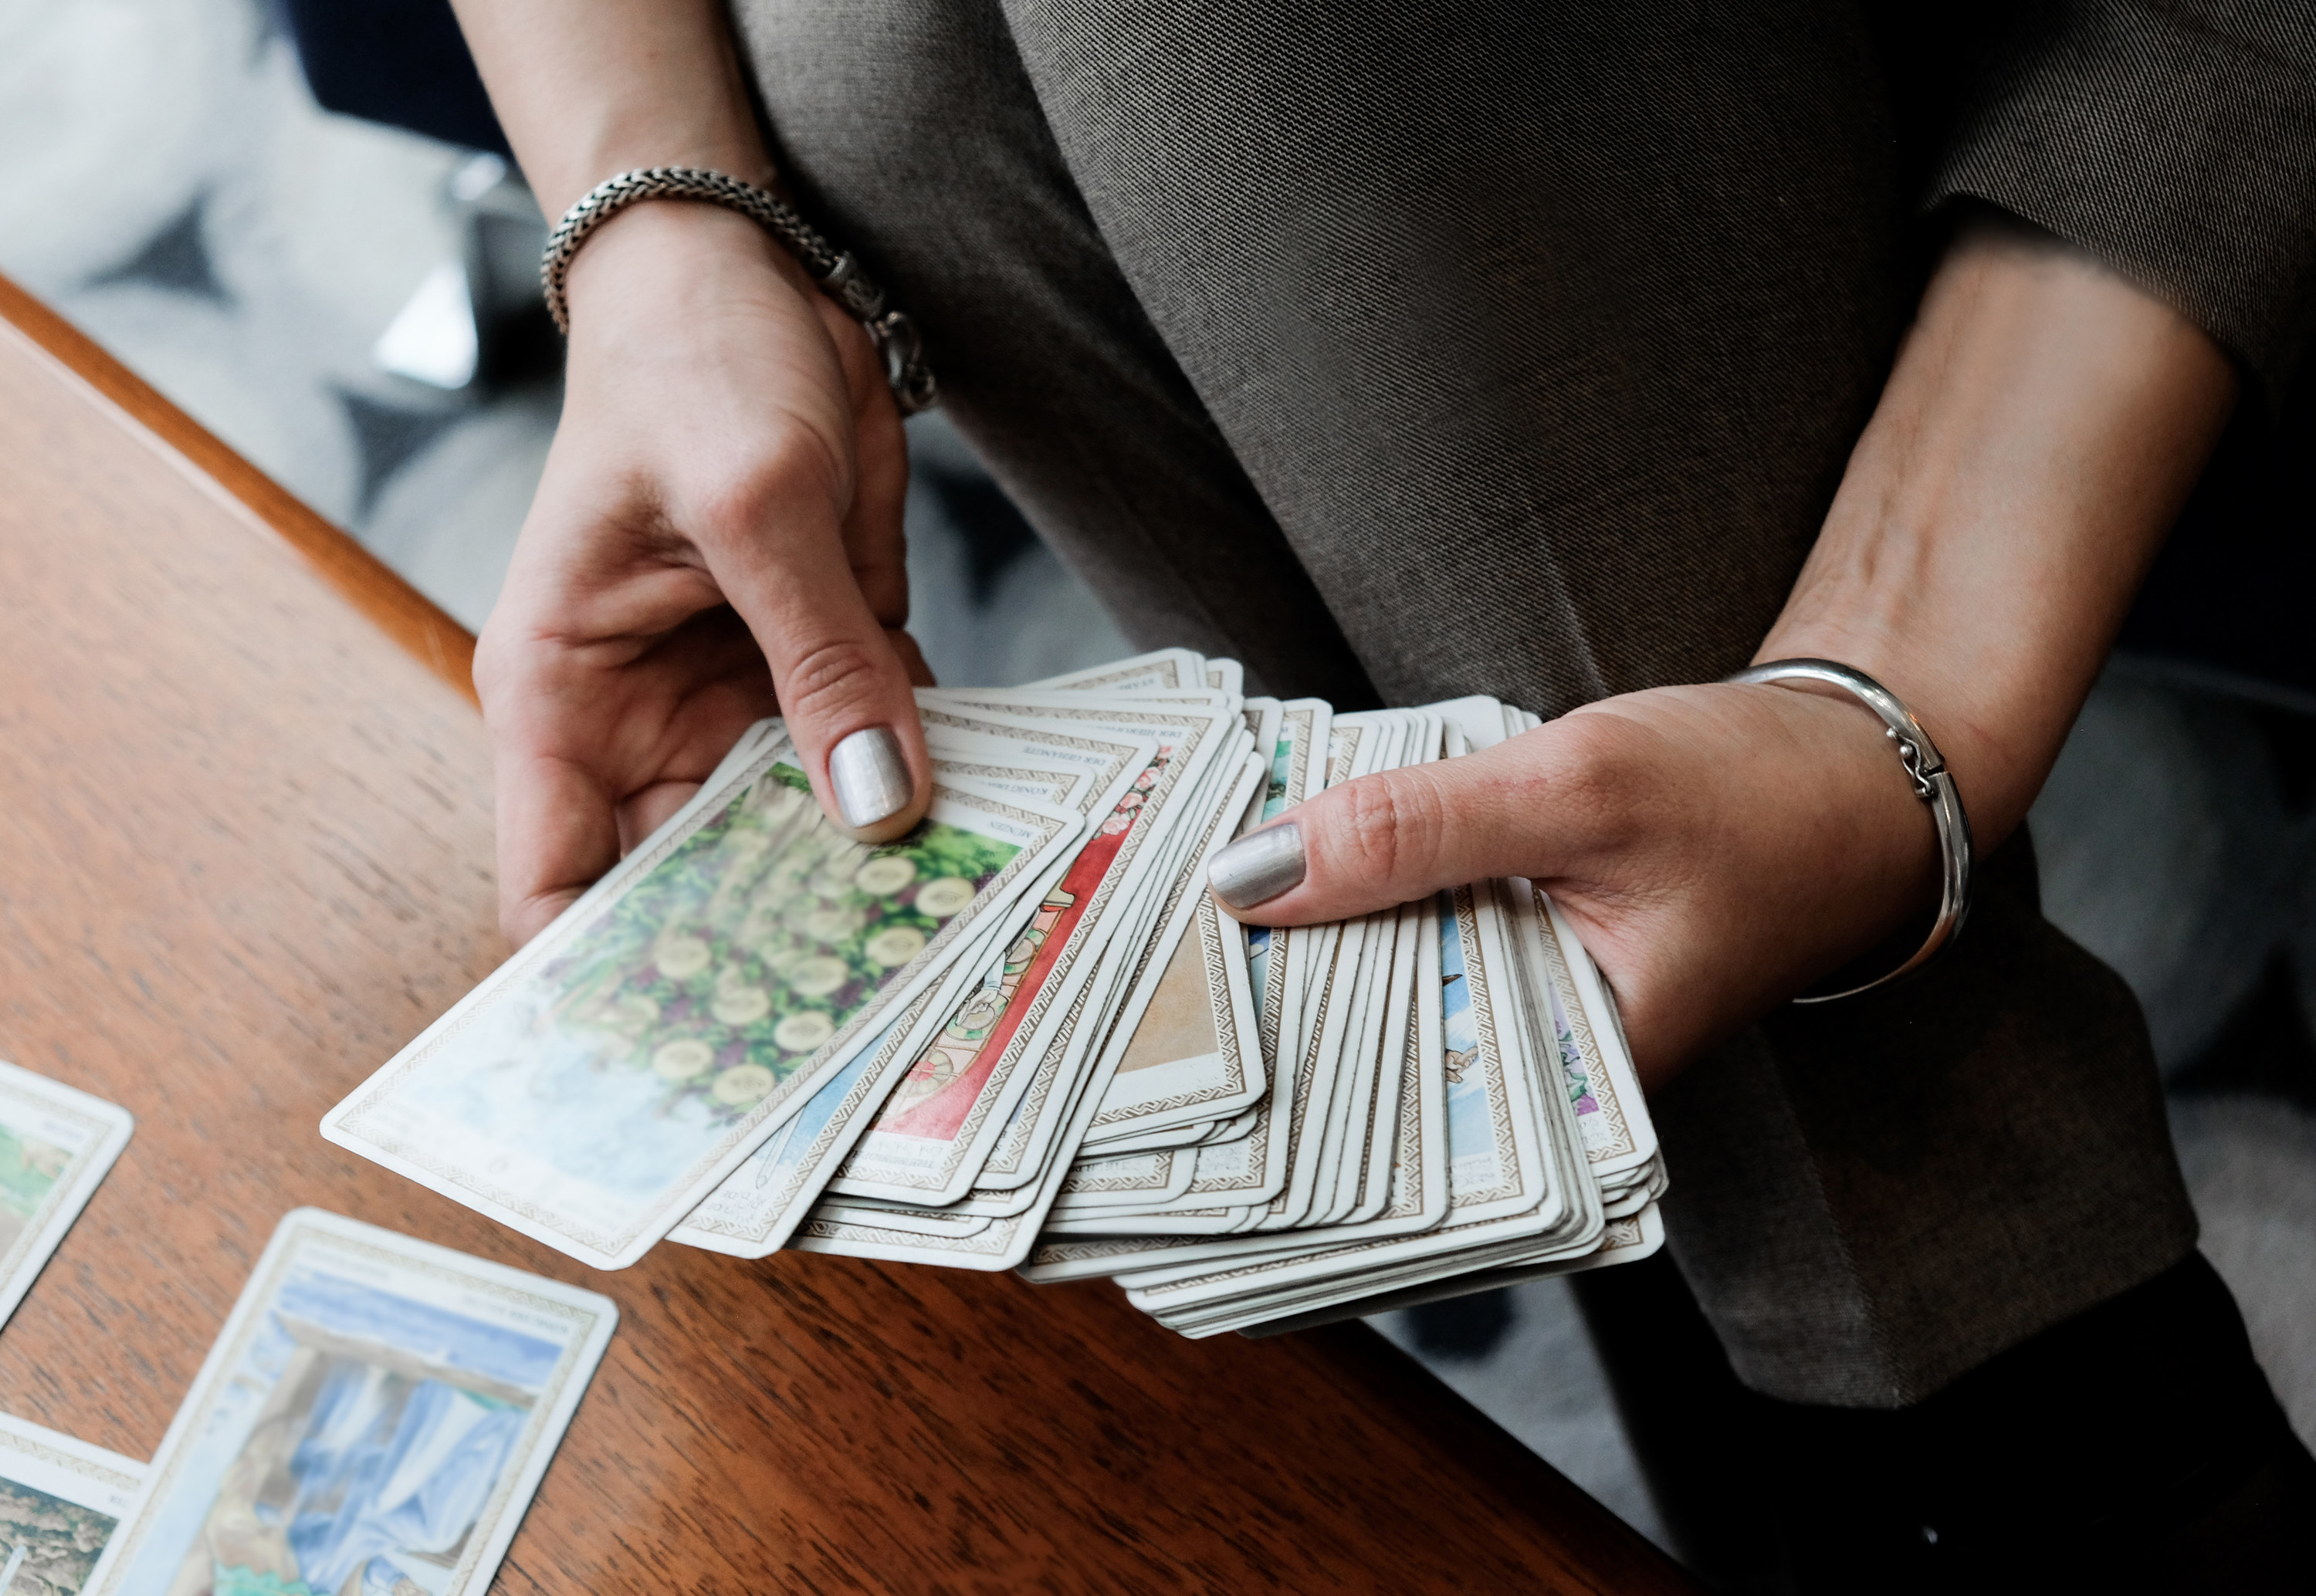 A person holding a deck of tarot cards